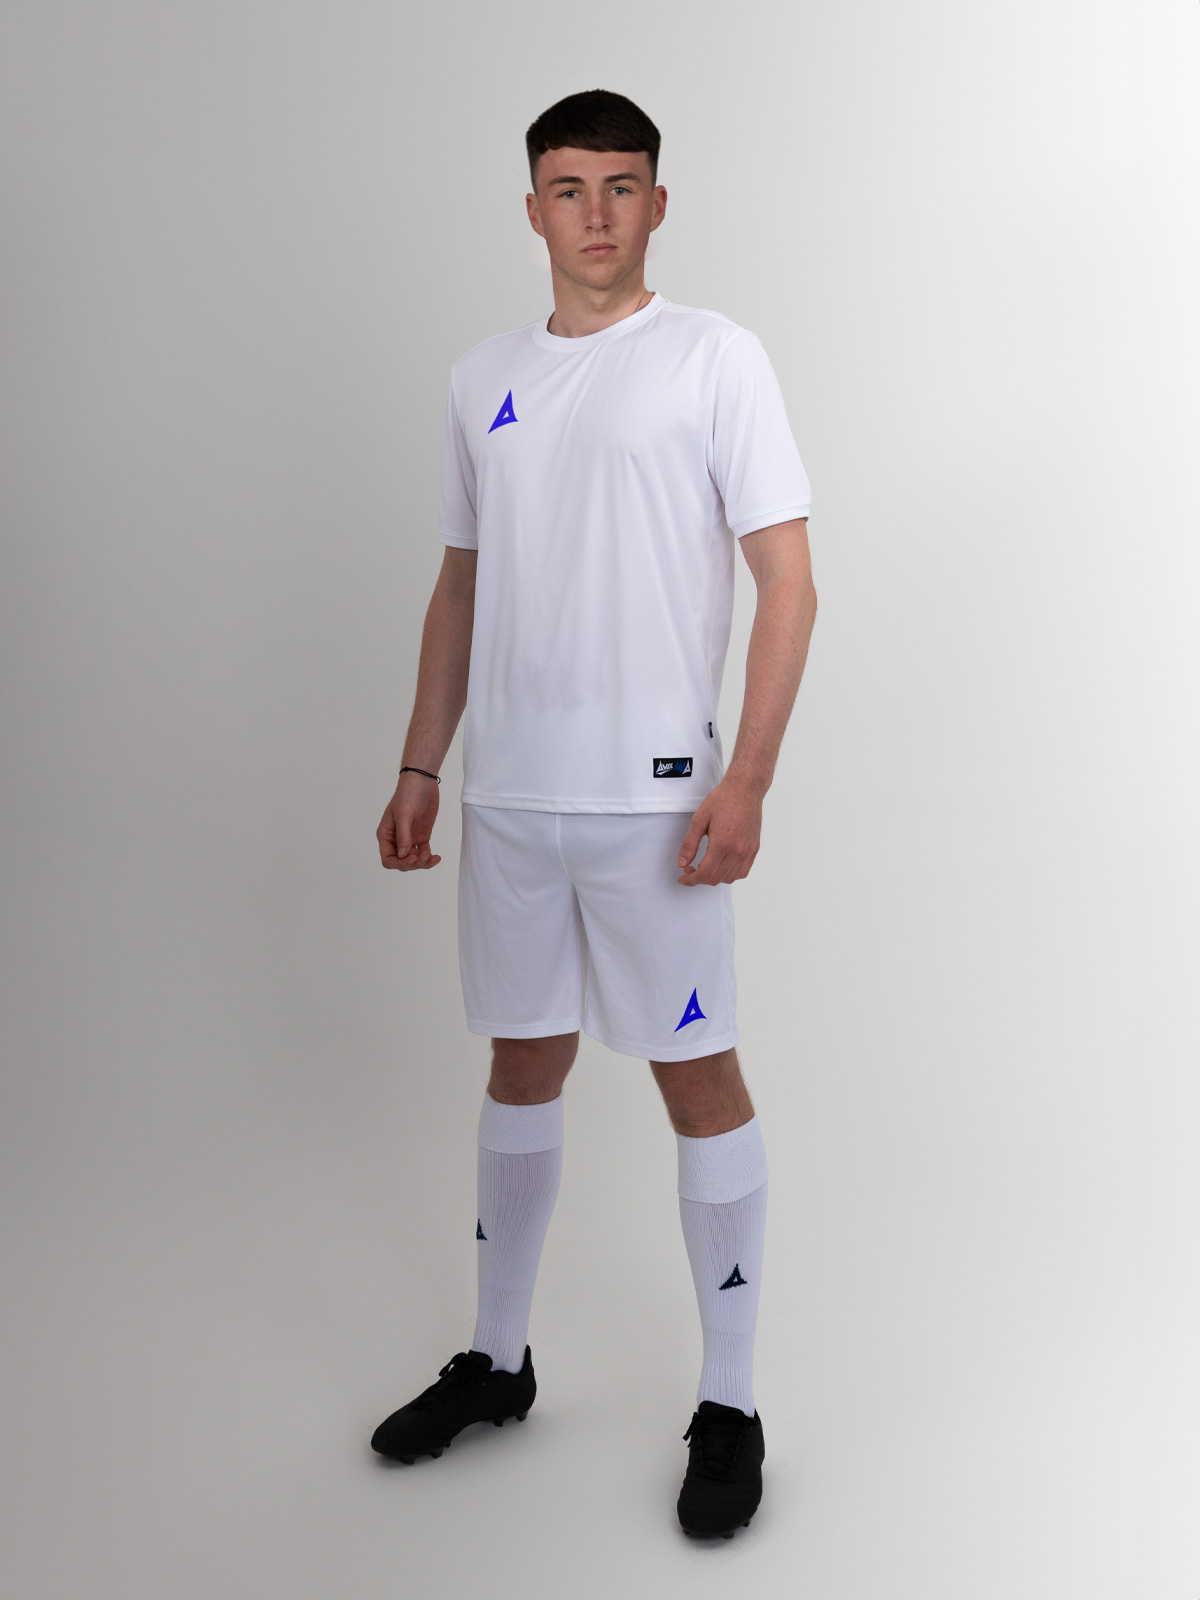 these white shorts for football are worn with a white football shirt, but could be worn with a royal blue shirt